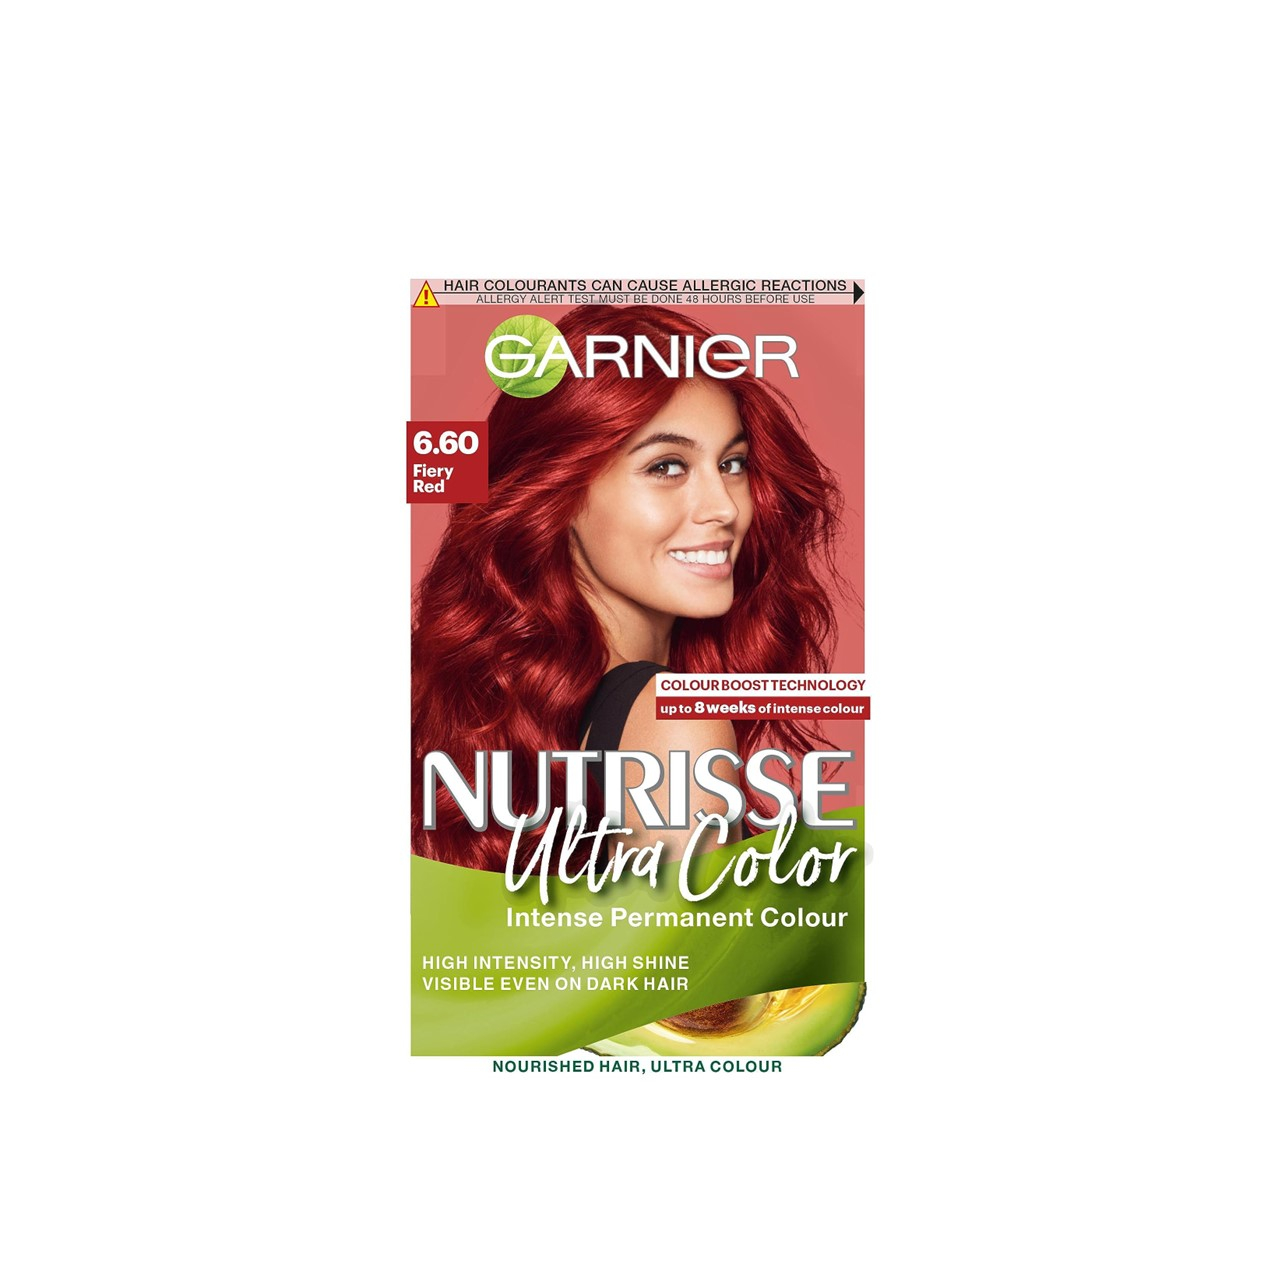 https://static.beautytocare.com/media/catalog/product/g/a/garnier-nutrisse-ultra-color-6-60-fiery-red-permanent-hair-dye.jpg